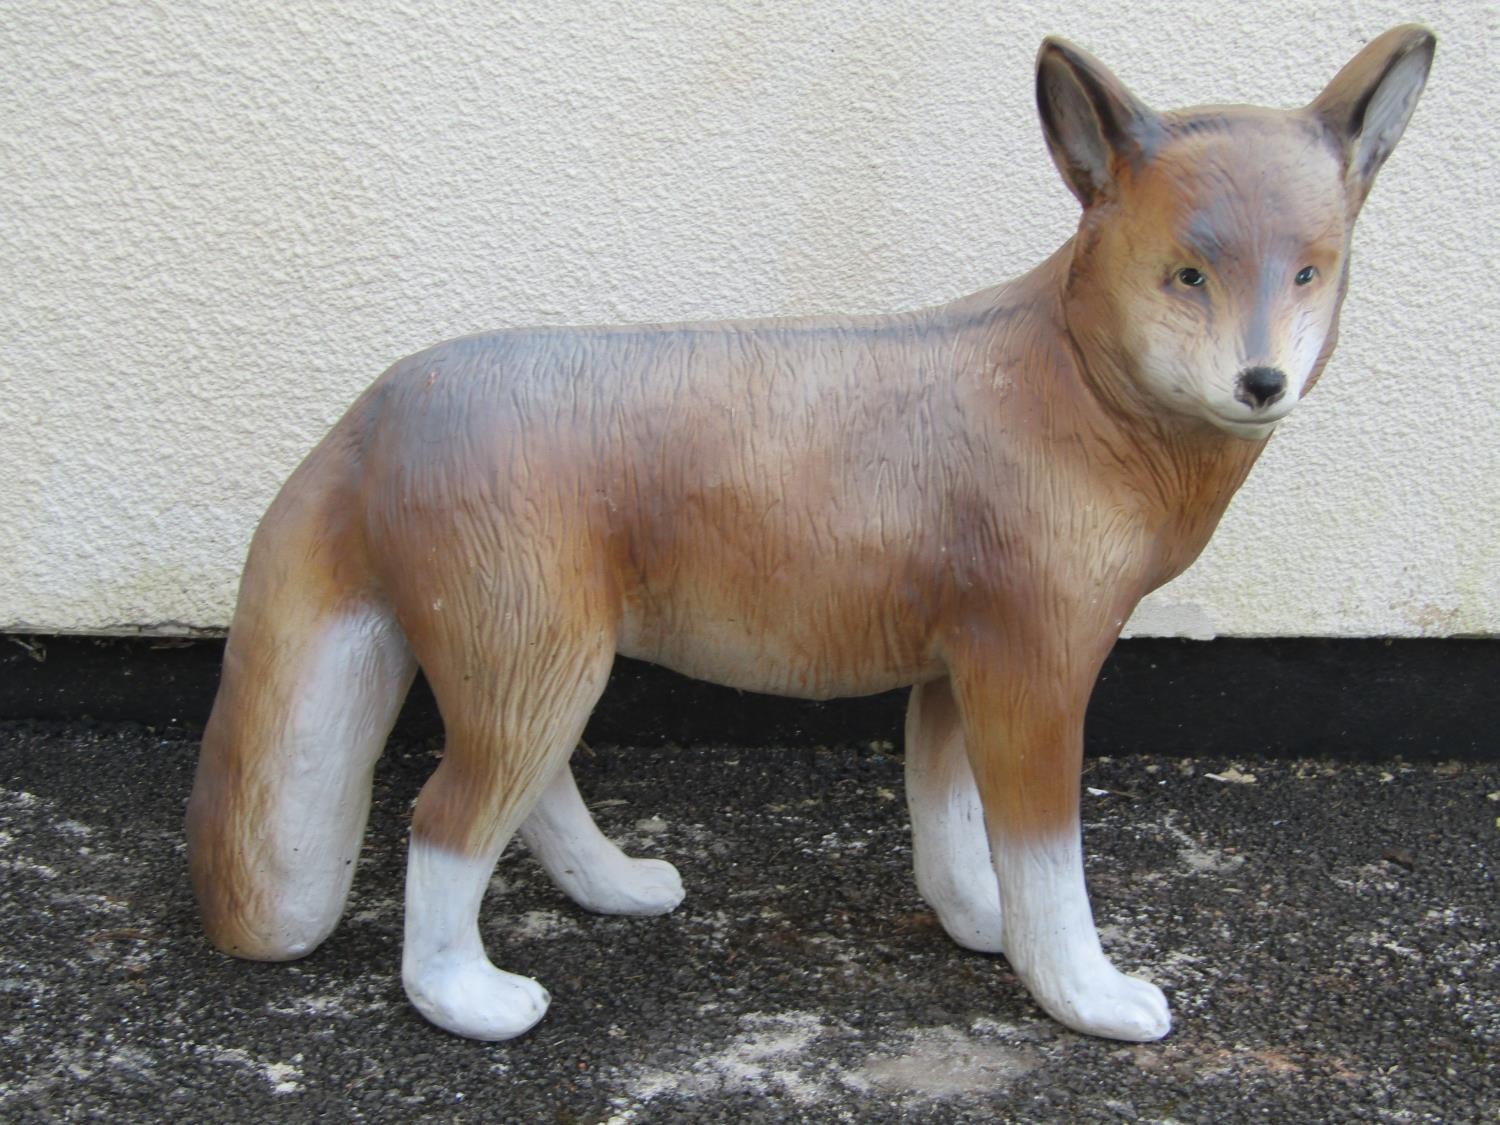 A composite model/ornament in the form of a standing fox 53 cm high x 60 cm long approximately